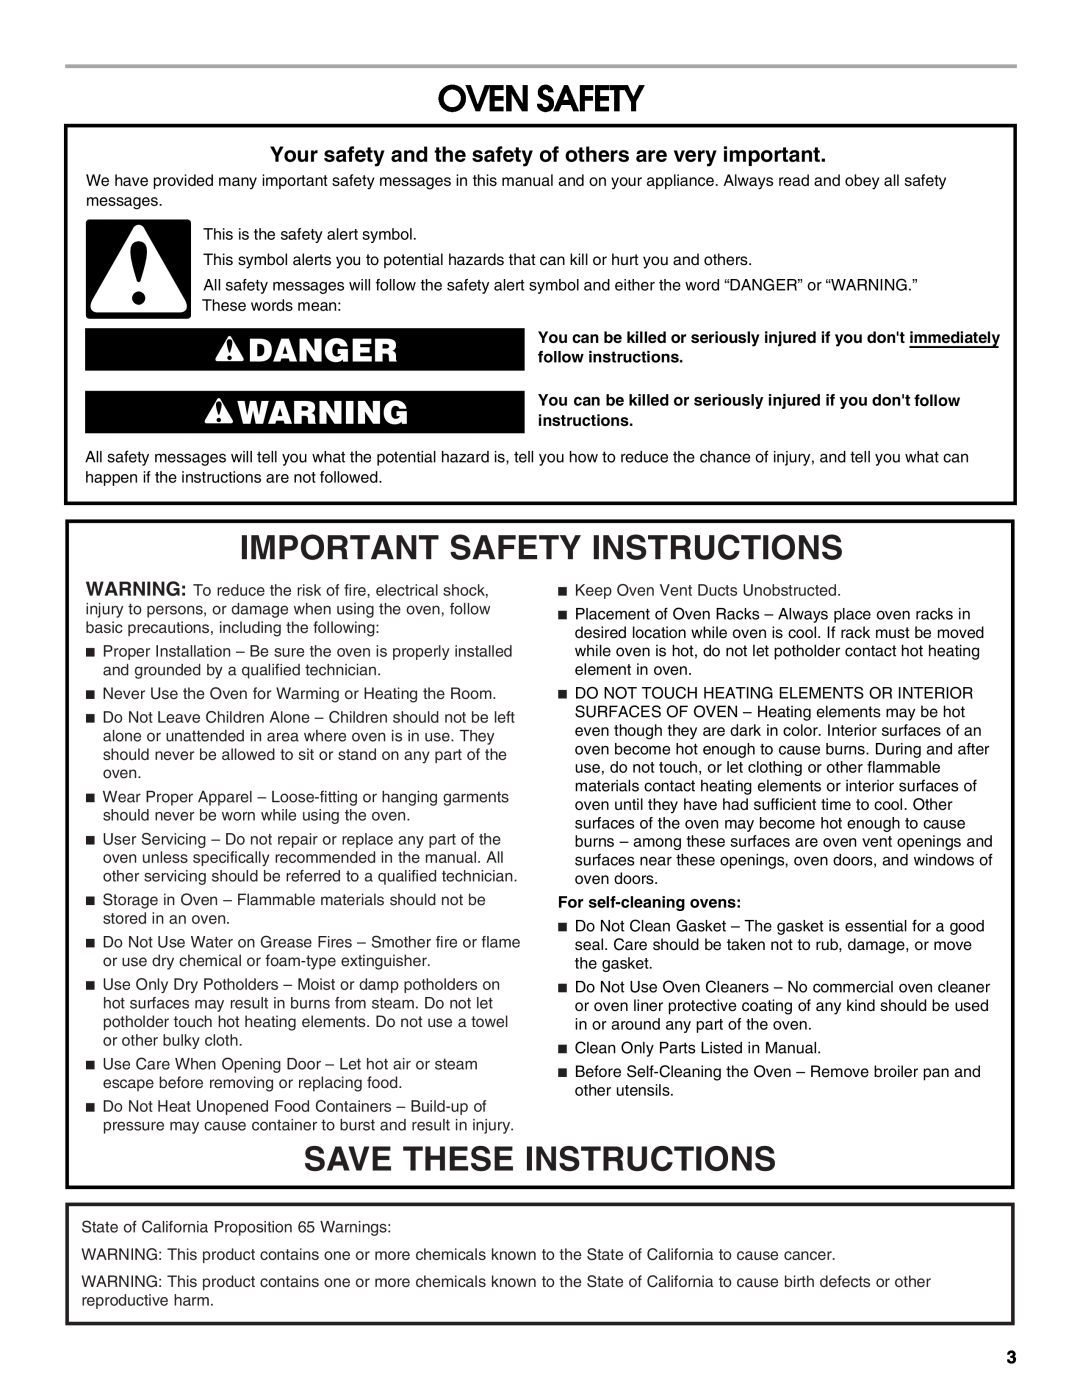 Jenn-Air JJW2827 Oven Safety, Important Safety Instructions, Save These Instructions, Danger, For self-cleaning ovens 